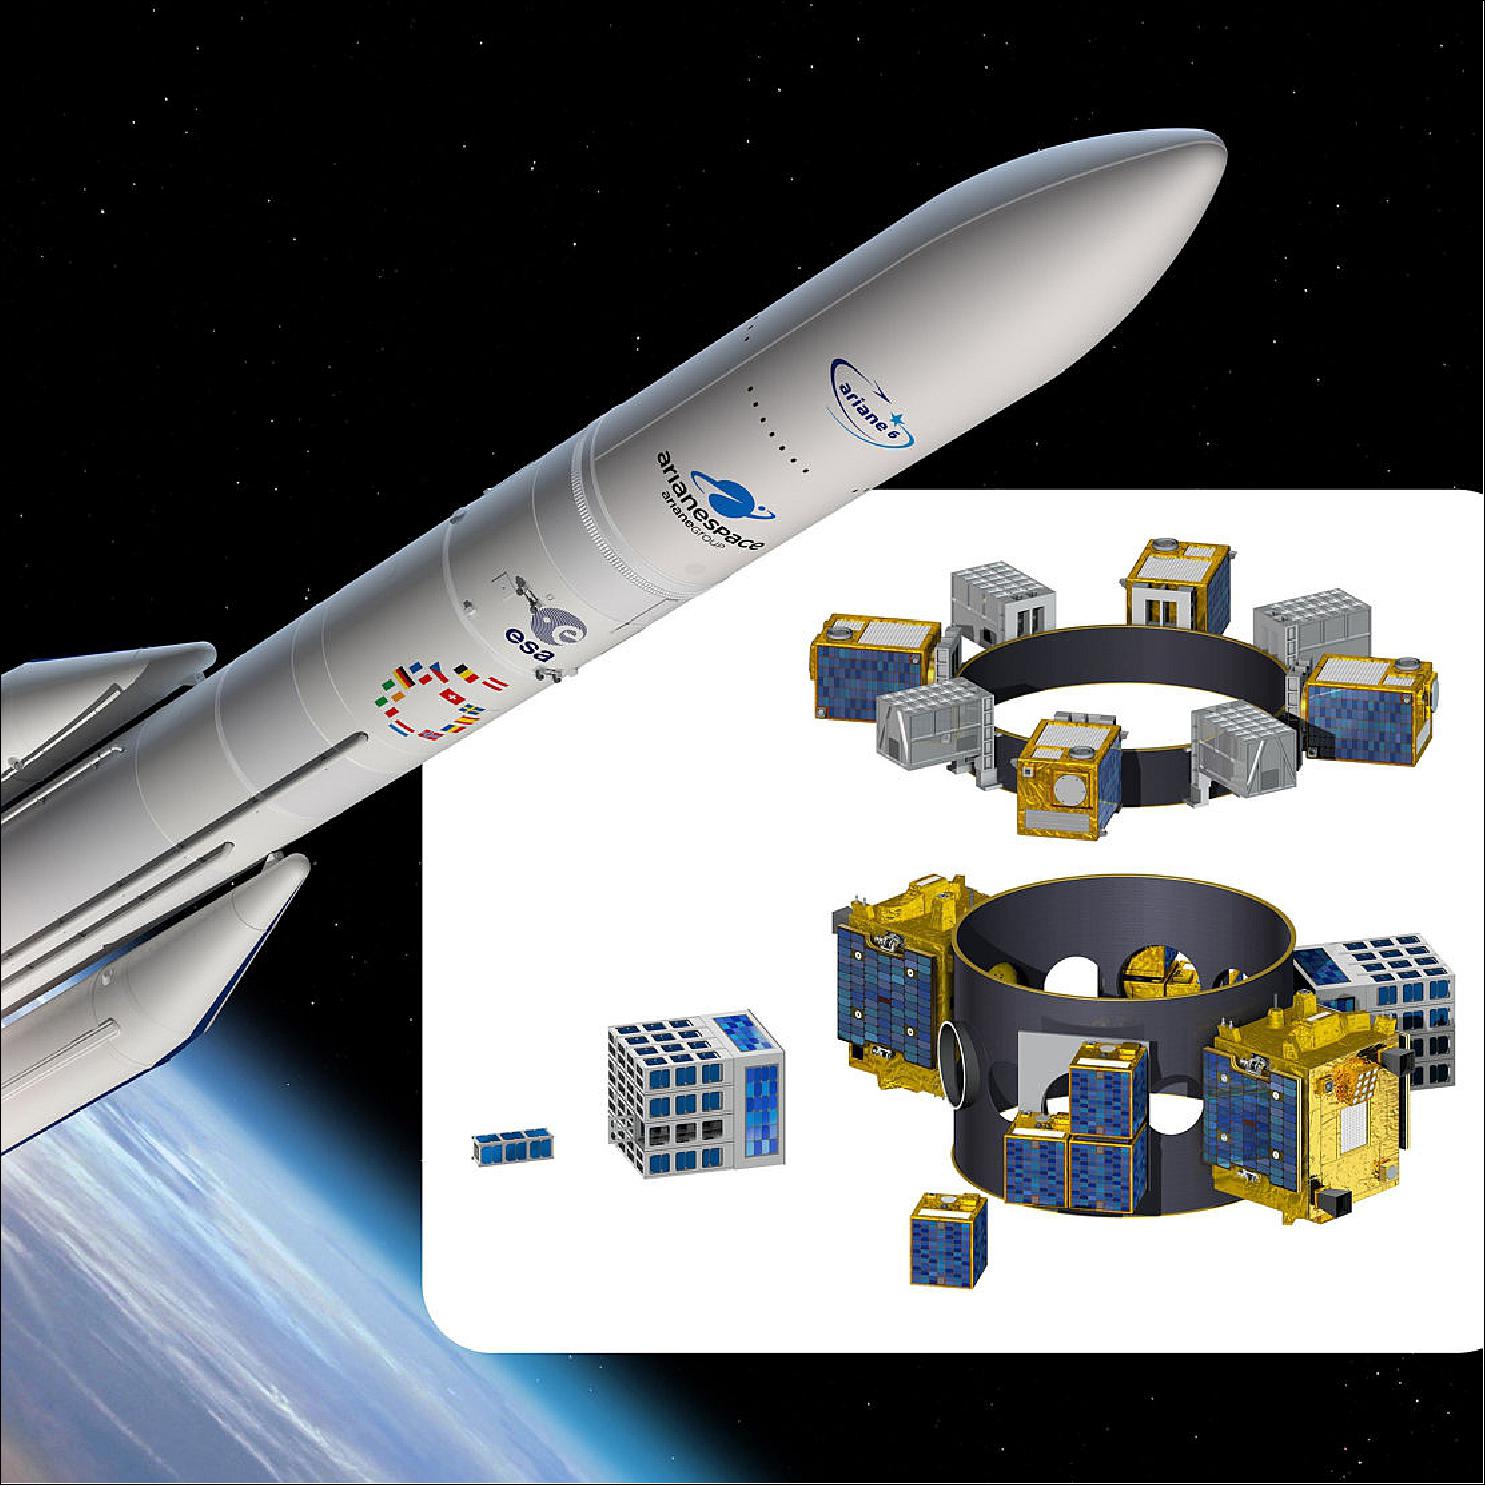 Figure 116: ESA’s Light satellite Launch opportunities initiative is investigating possible low-cost launch service solutions based on Ariane-6, Vega and Vega-C that efficiently combine payloads in the same mission and offer a standardized service to customers (image credit: ESA)